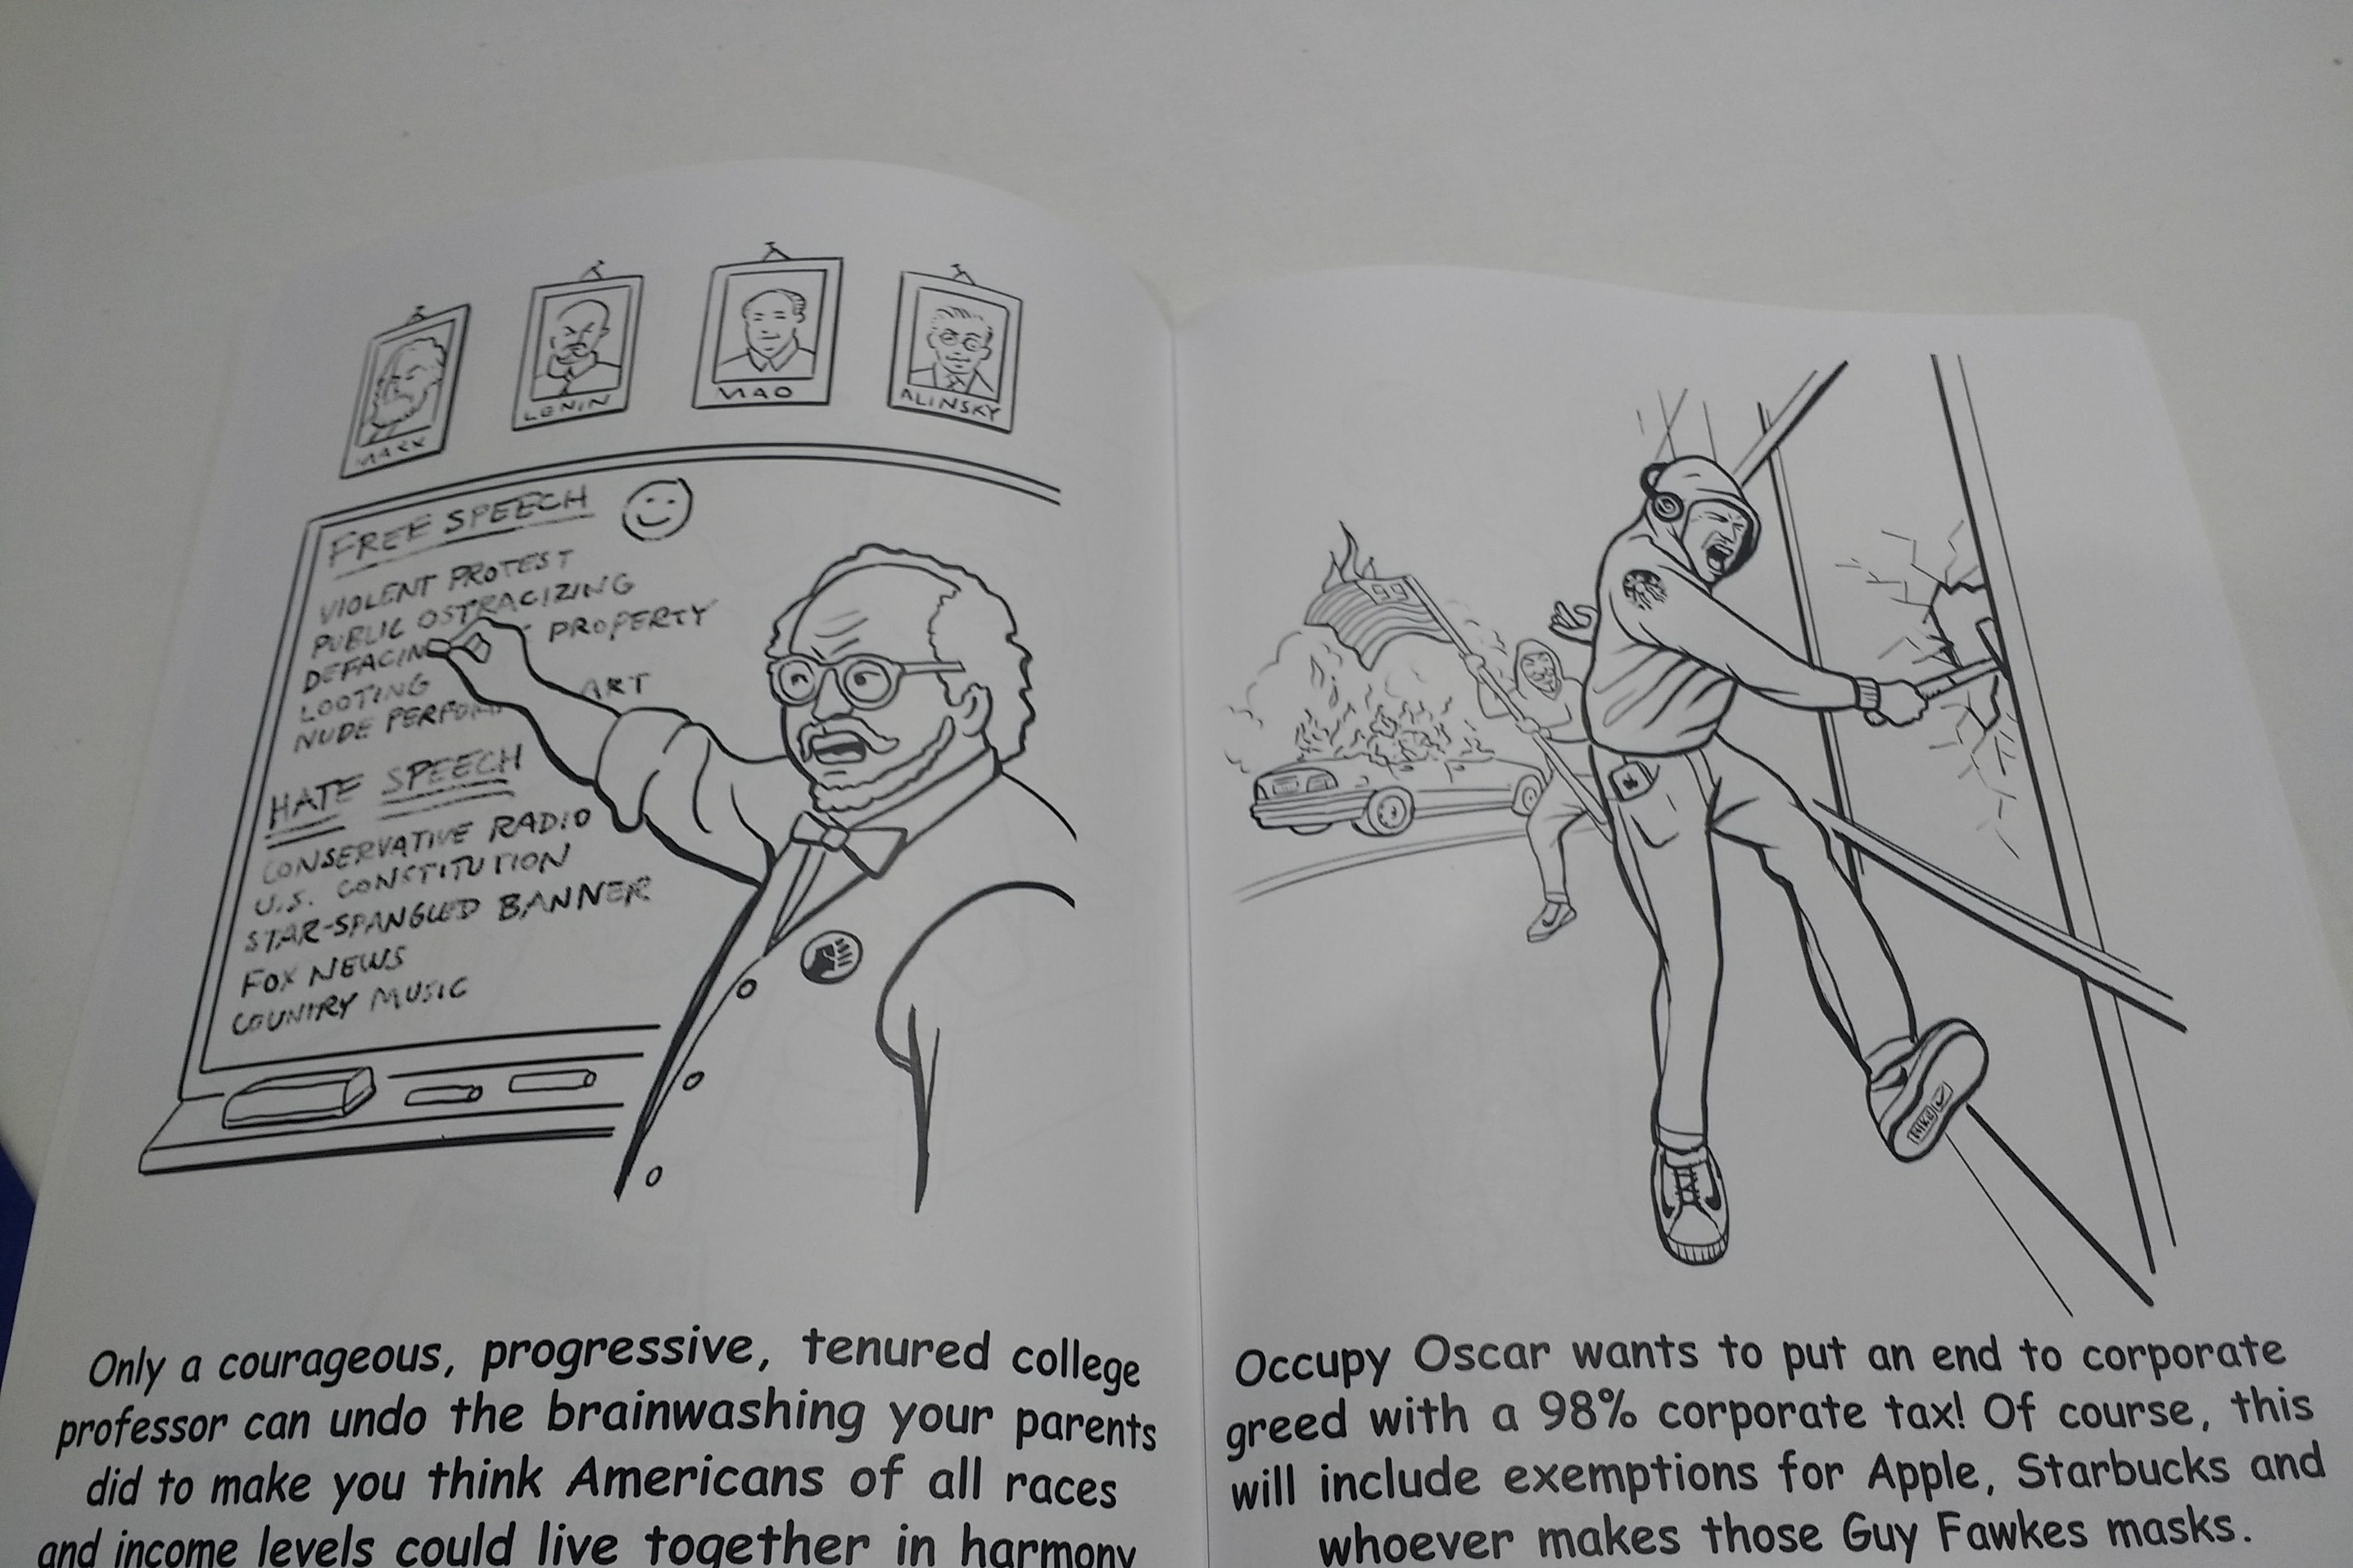 Image from "Safe Spaces" coloring book.